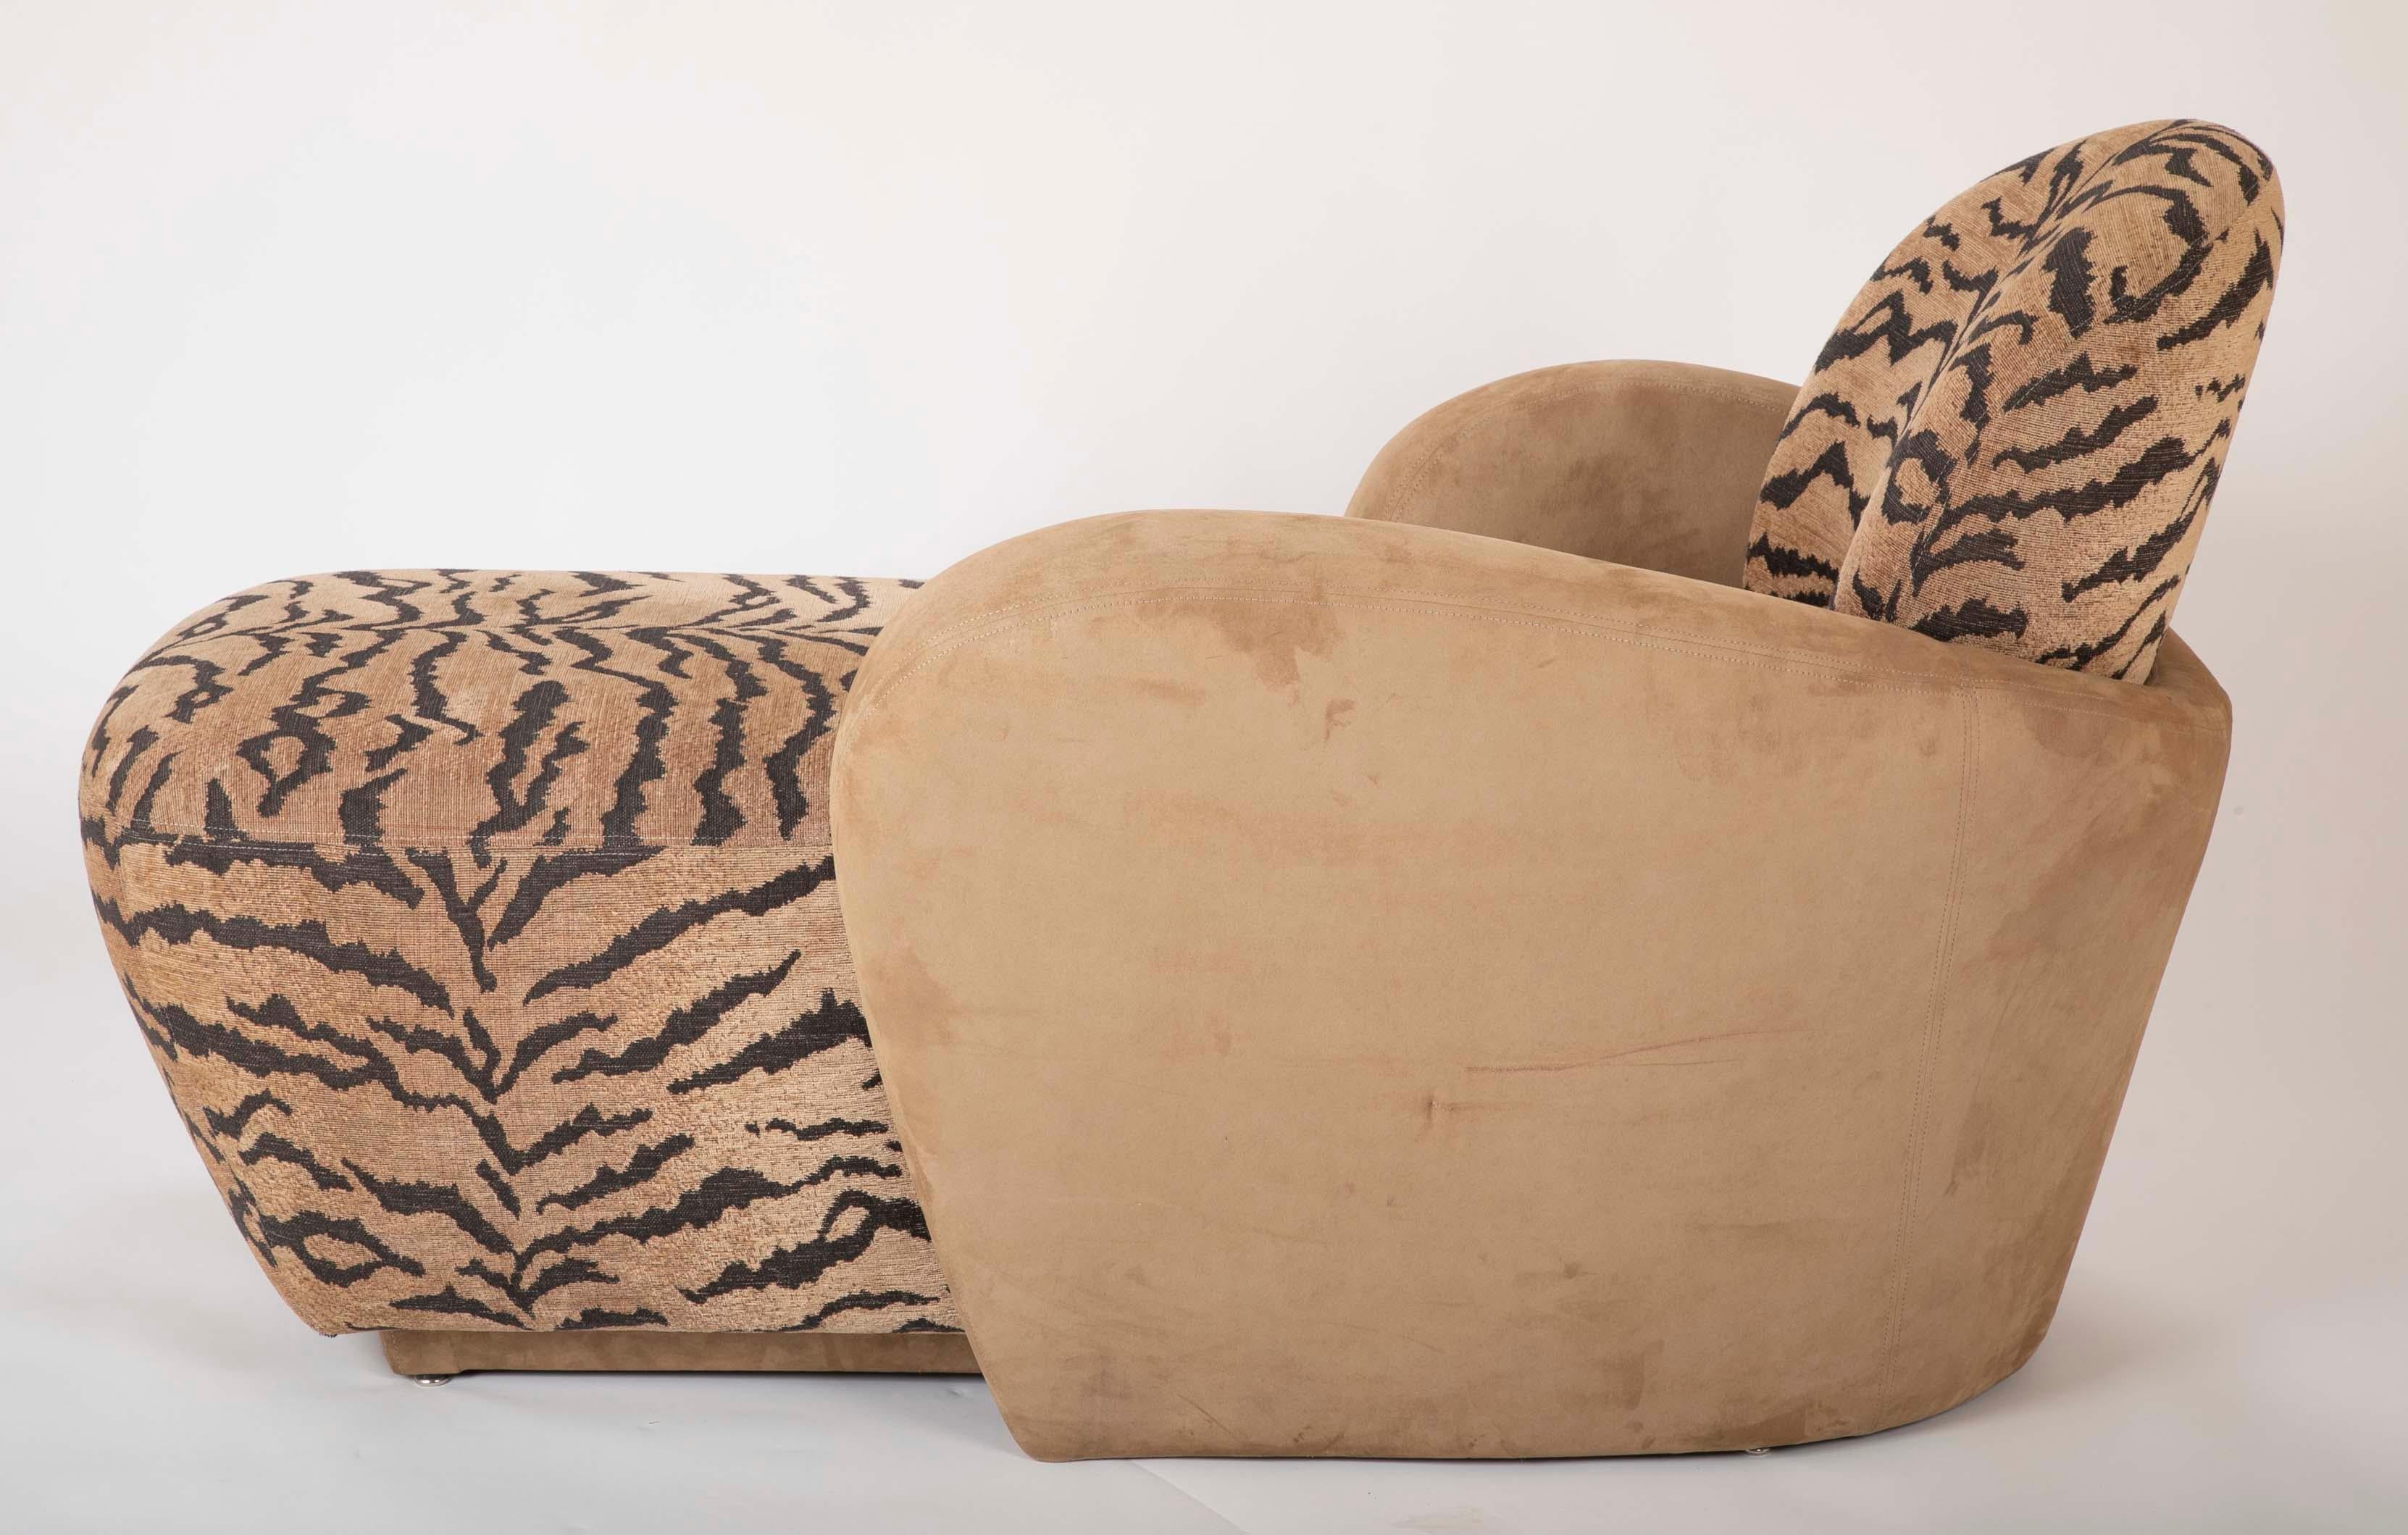 20th Century Midcentury Sofa/Chaise in Suede Leather and Tiger Fabric For Sale